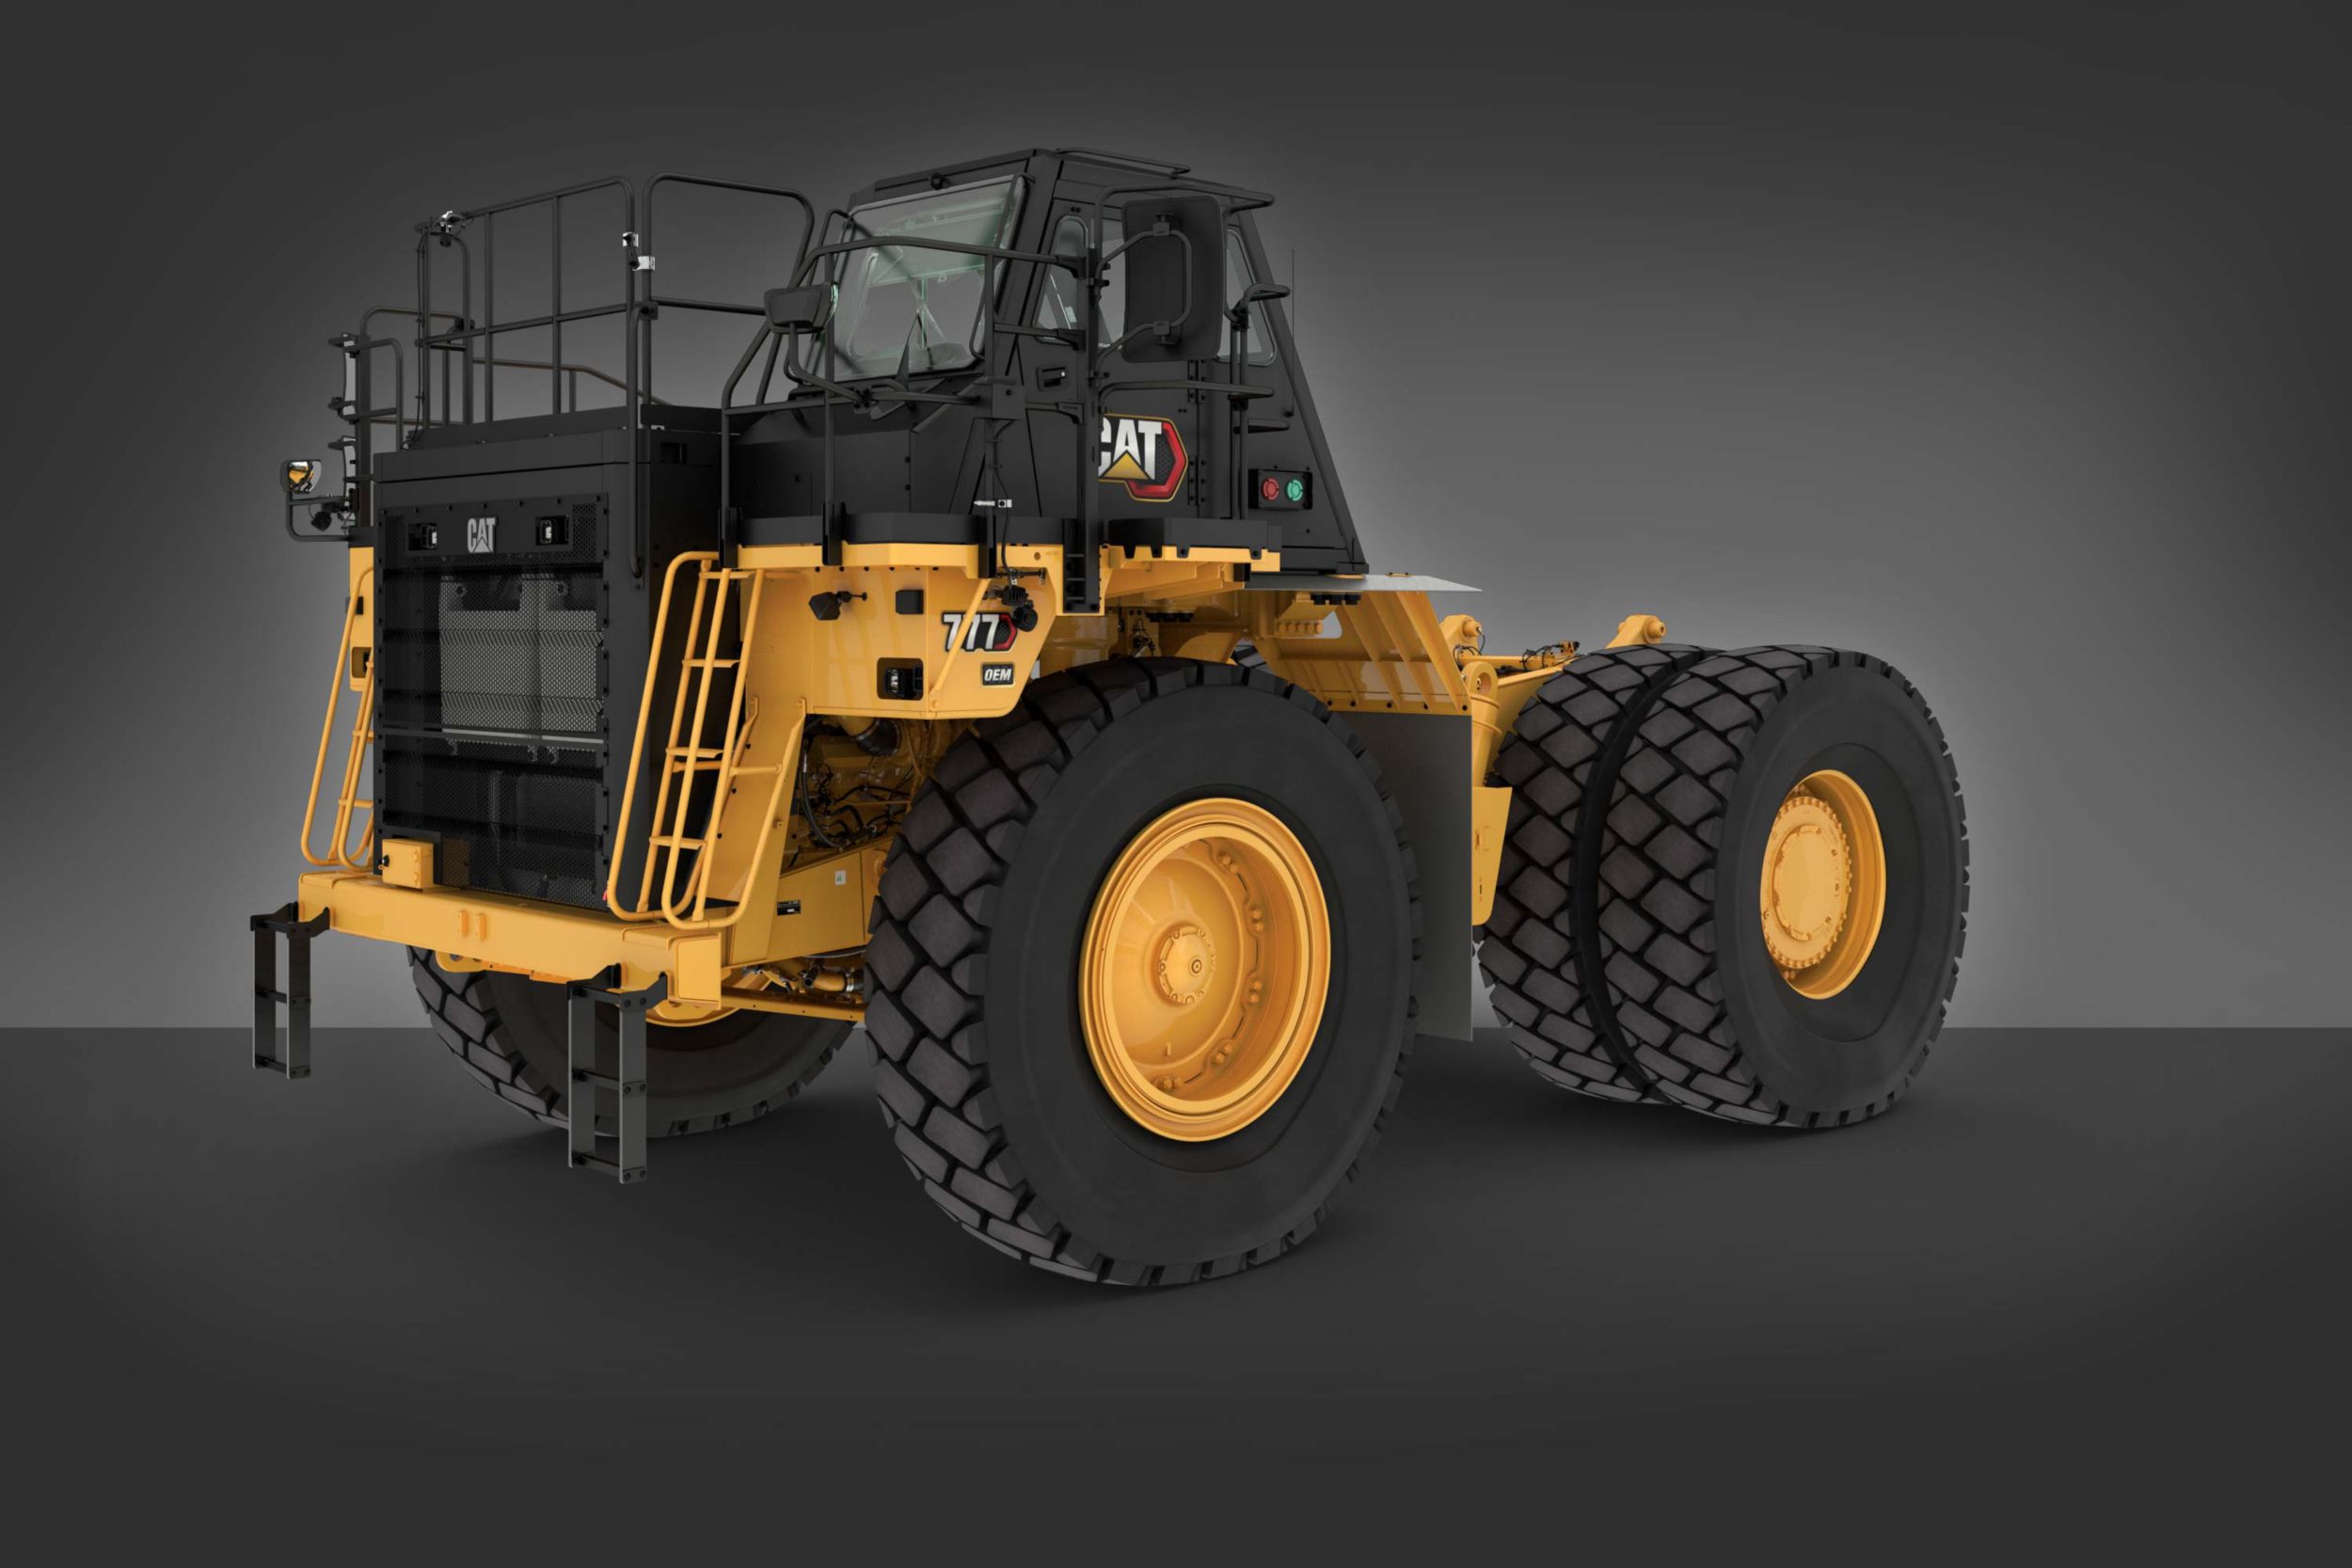 The Cat 777 (05) bare chassis comes equipped with a higher Tractor ROPS certification ratings needed for specialty machines including water trucks, tow trucks, and fuel and lube trucks.